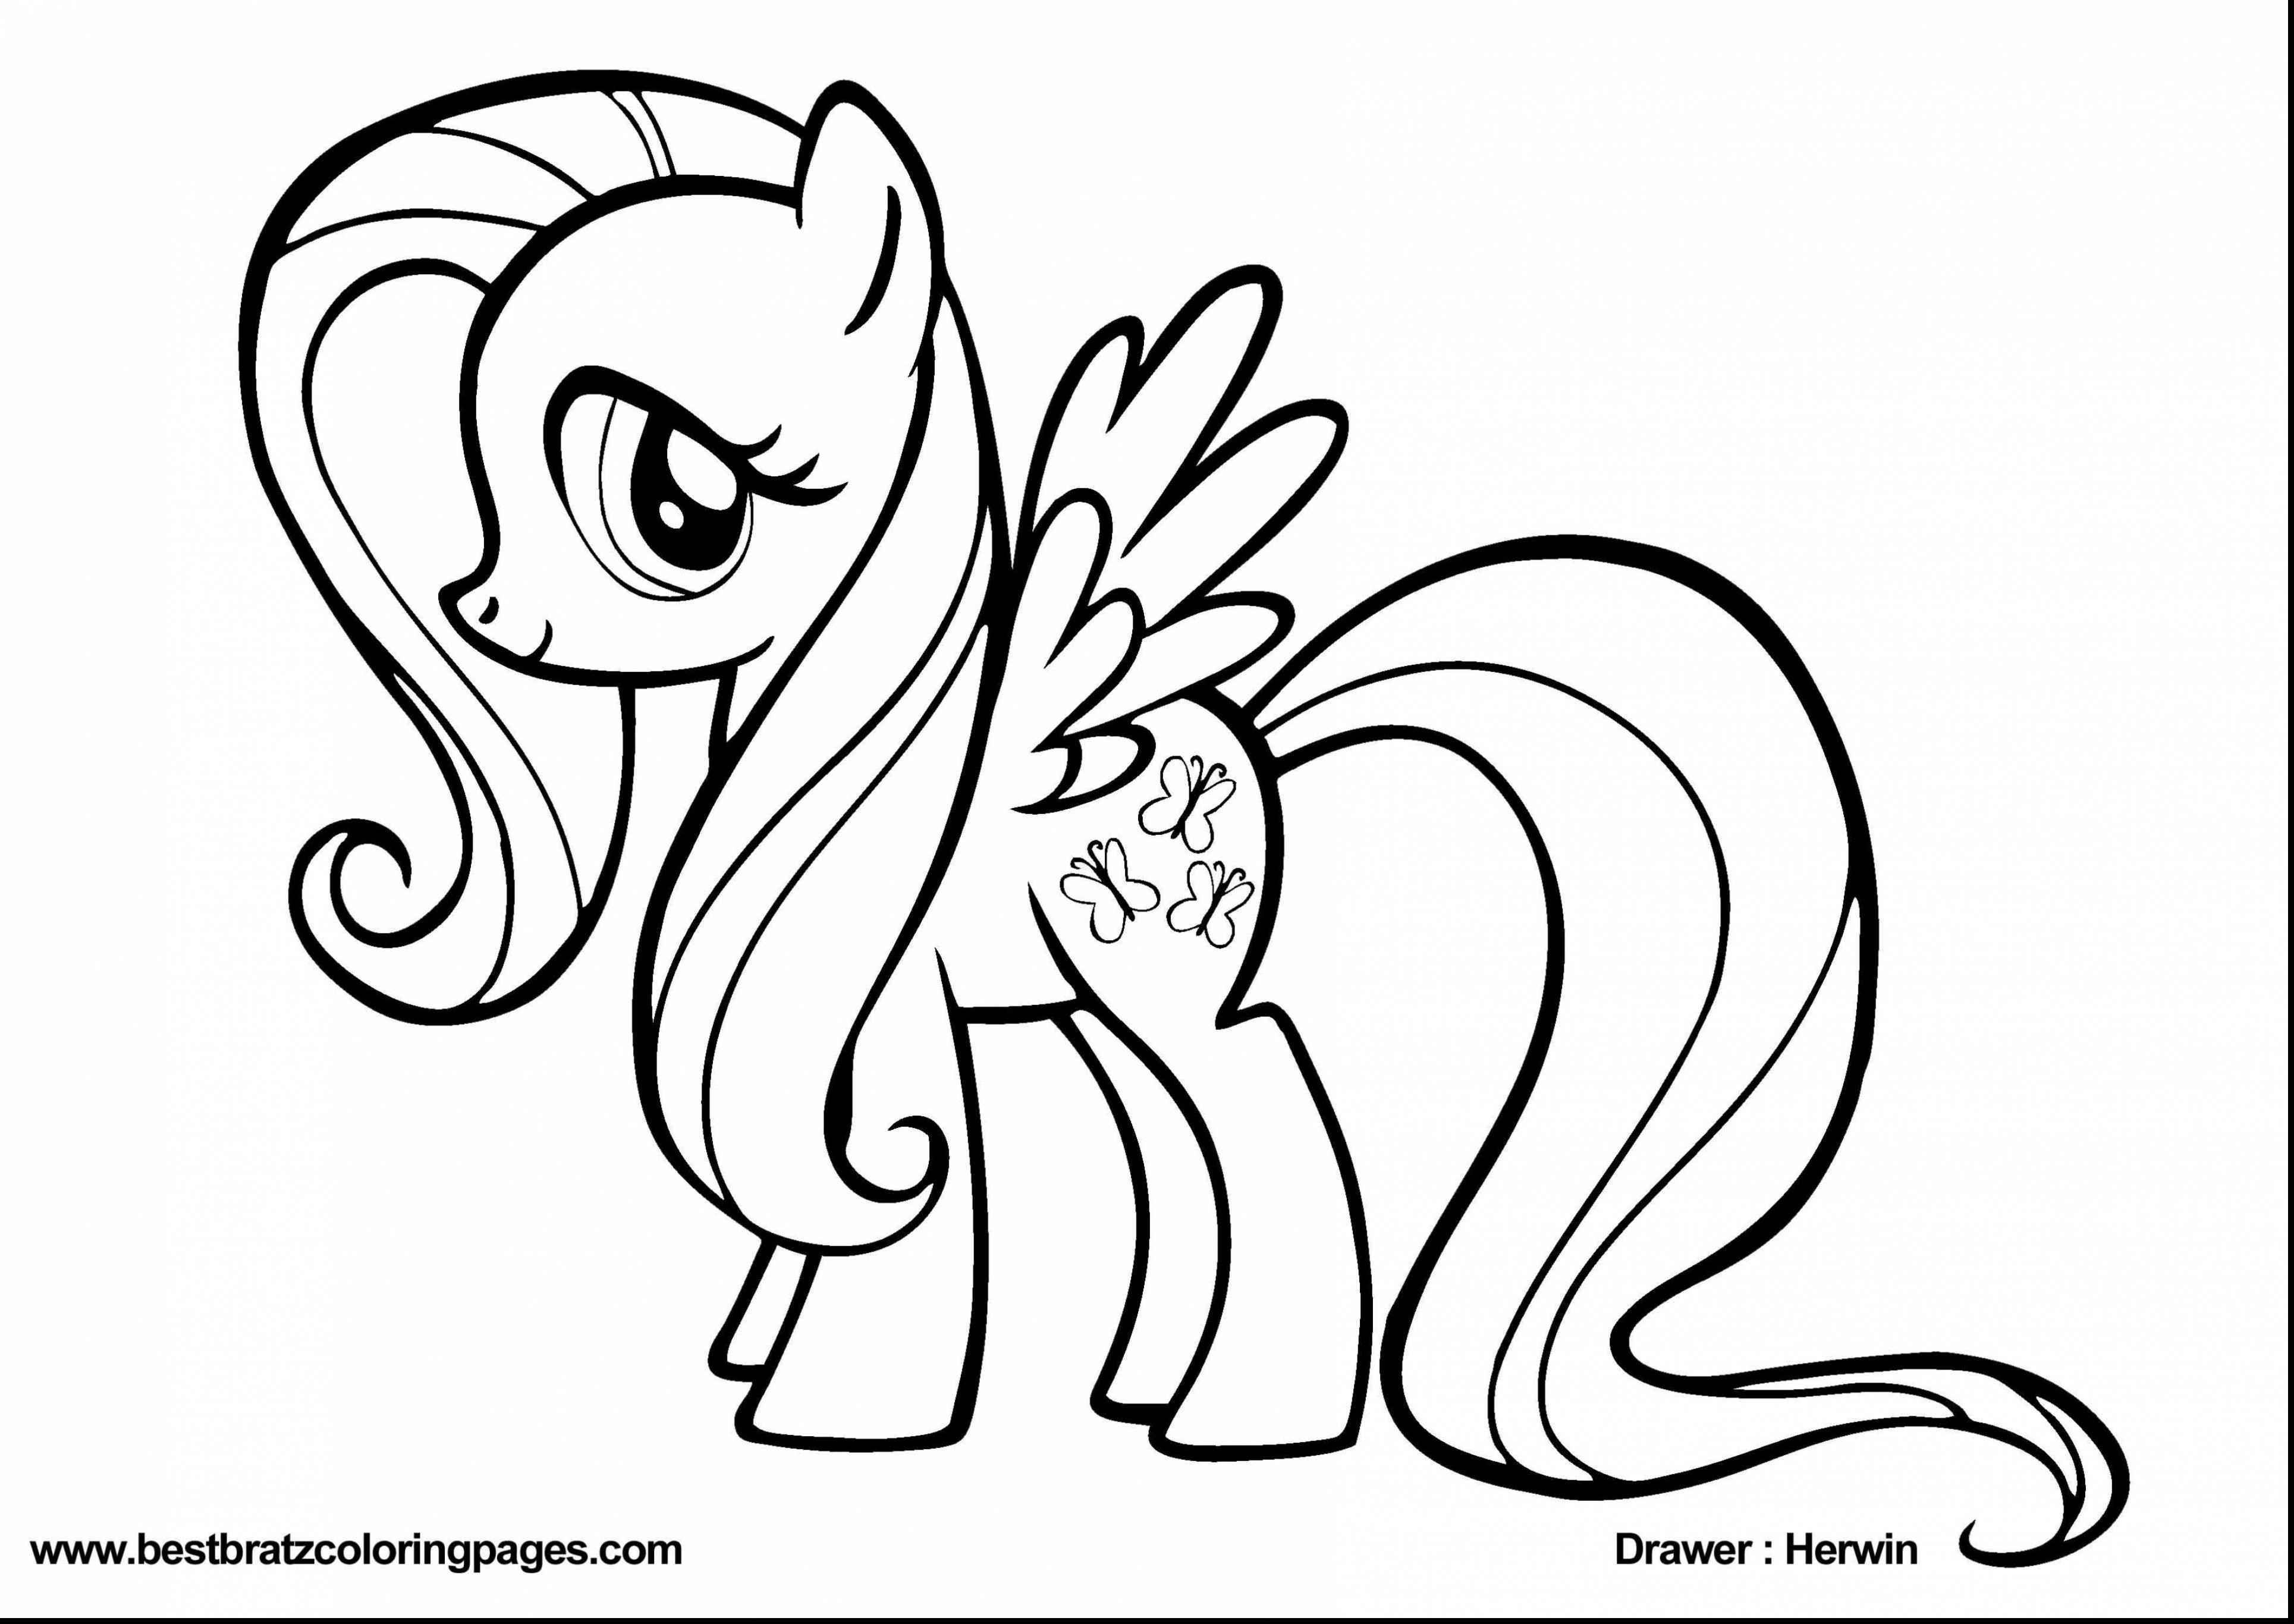 My Little Pony Fluttershy Coloring Pages Spectacular My Little Pony Fluttershy Coloring Pages With Pinkie